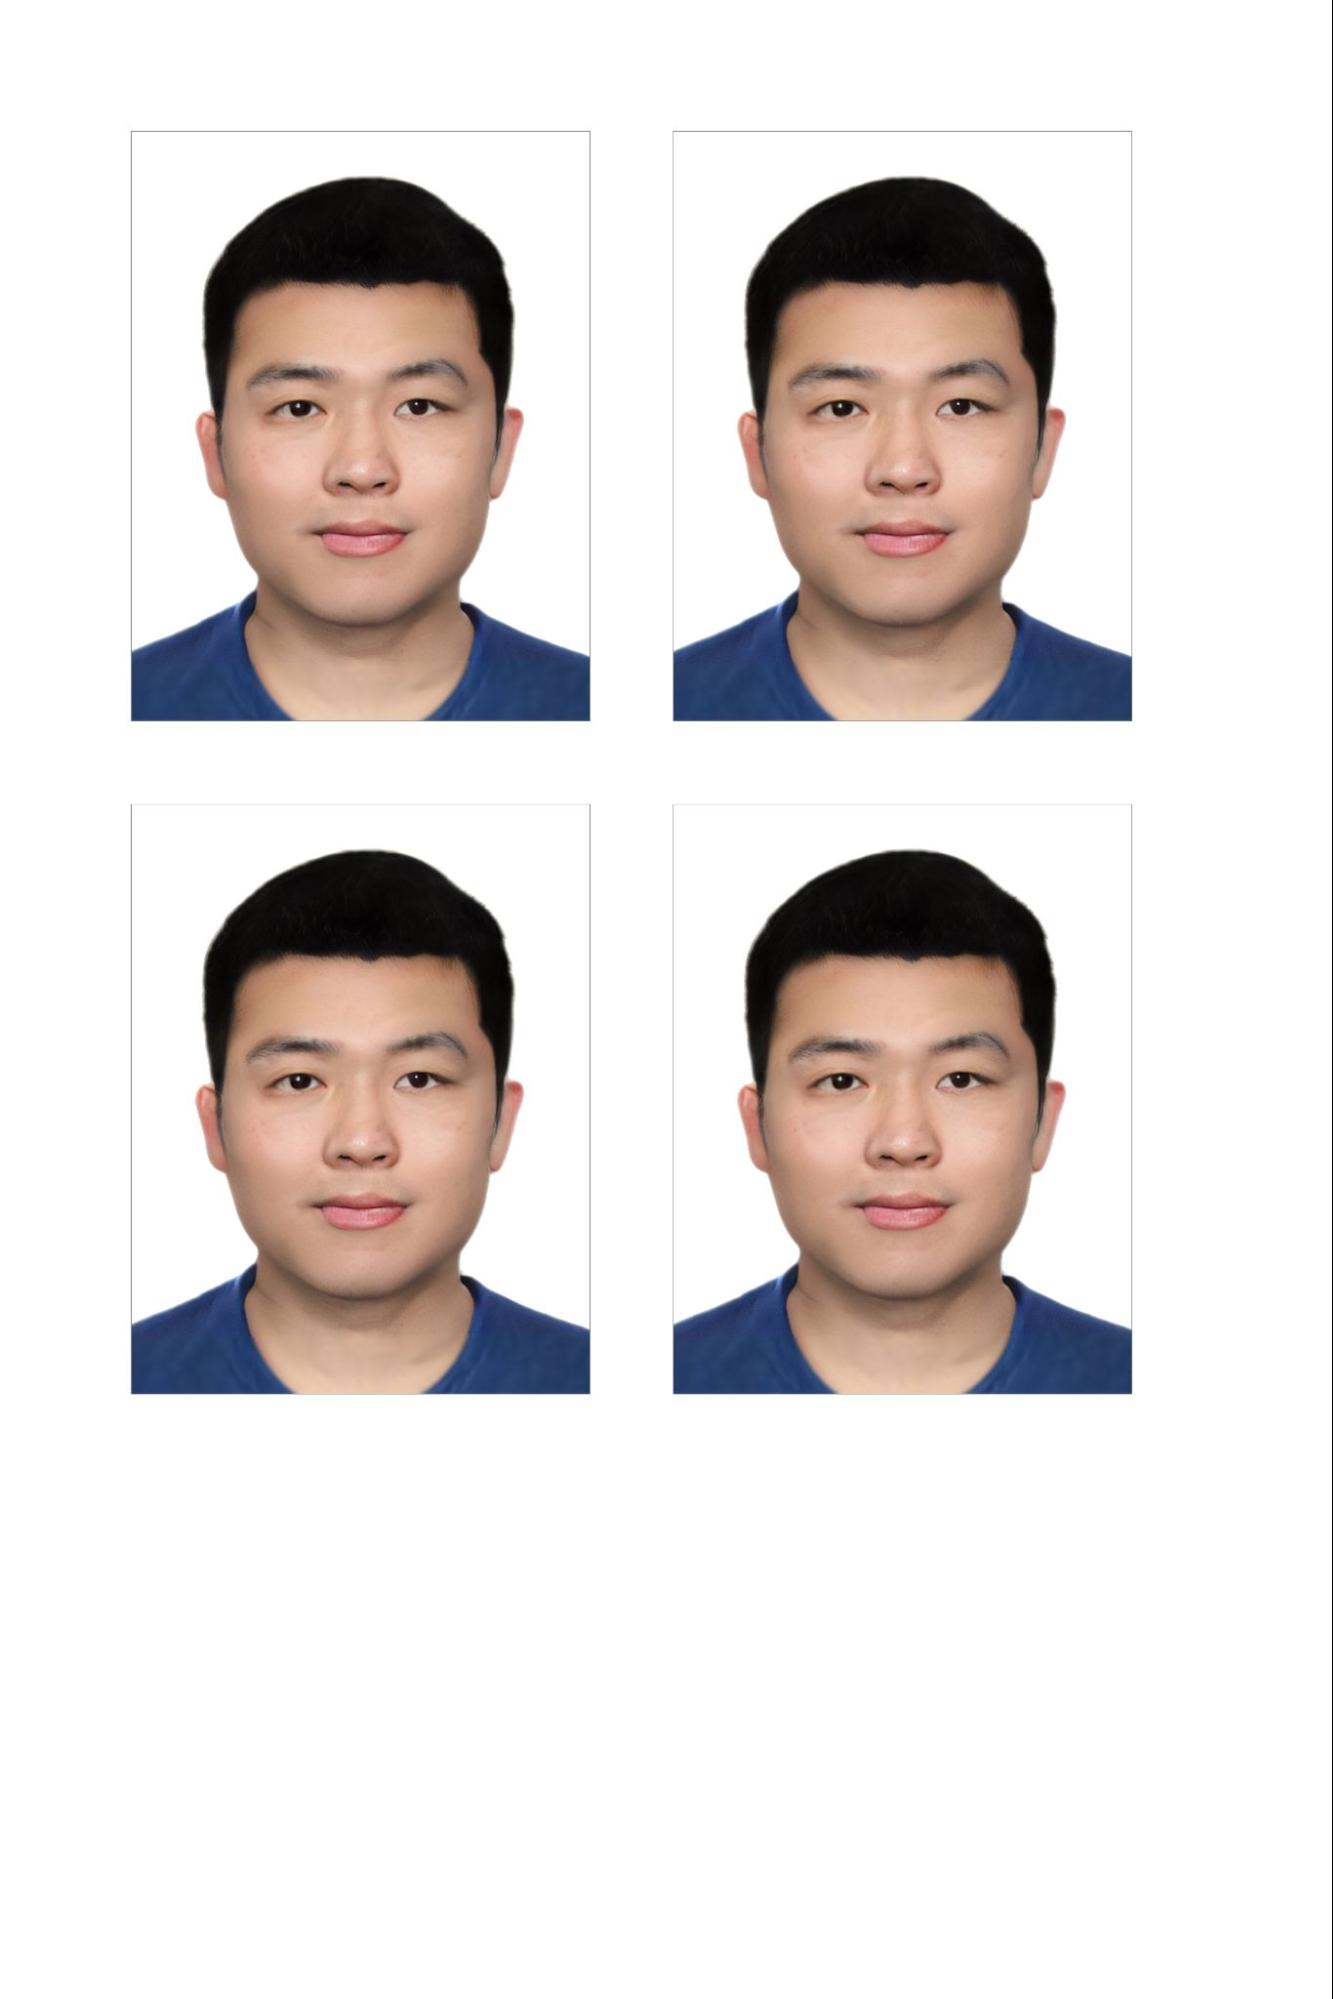 Example of the Taiwan e-visa photo for printing